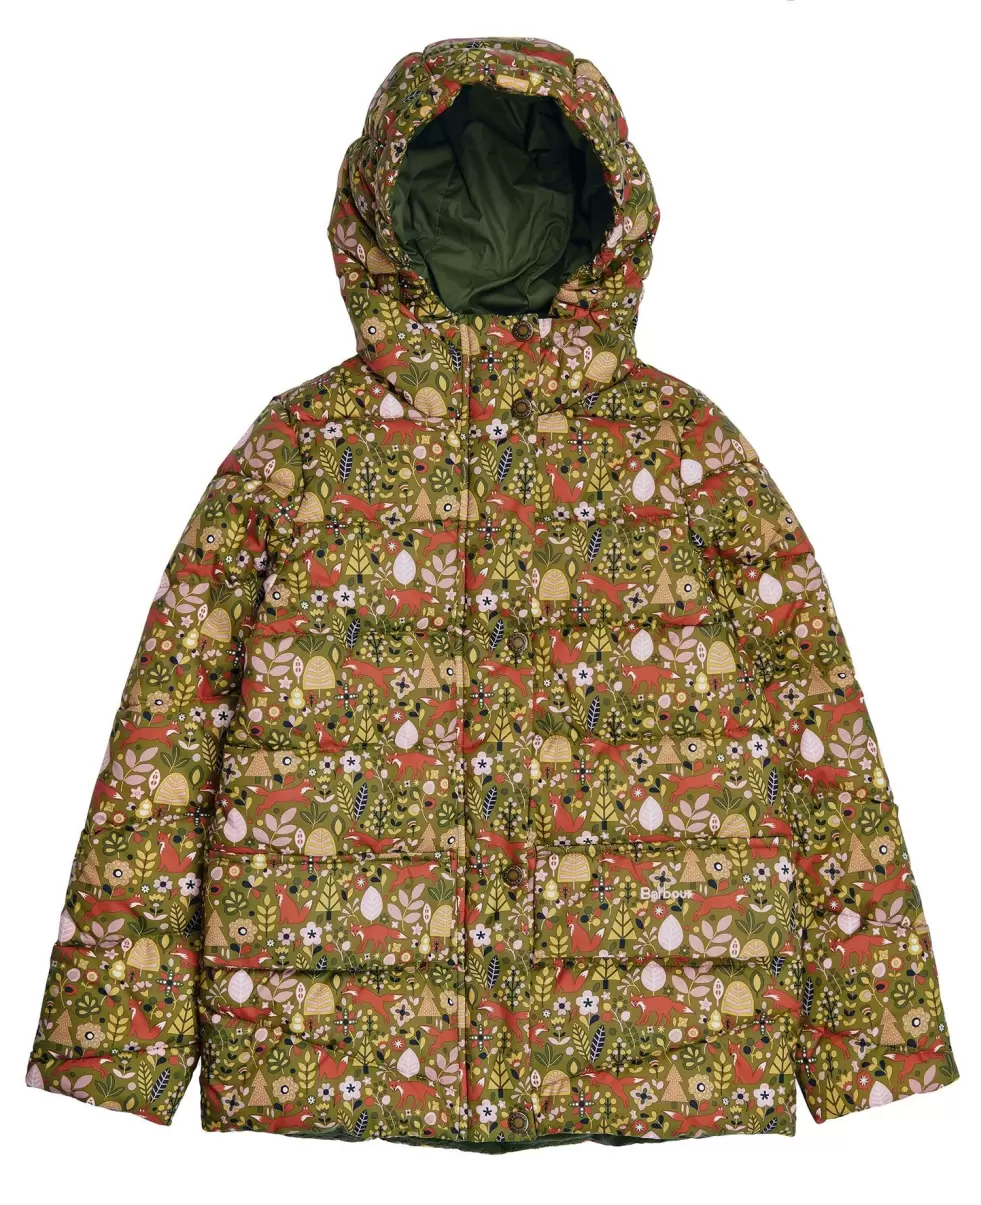 Barbour Girls' Bracken Printed Quilted Jacket Kids Clearance Jackets Green - 1